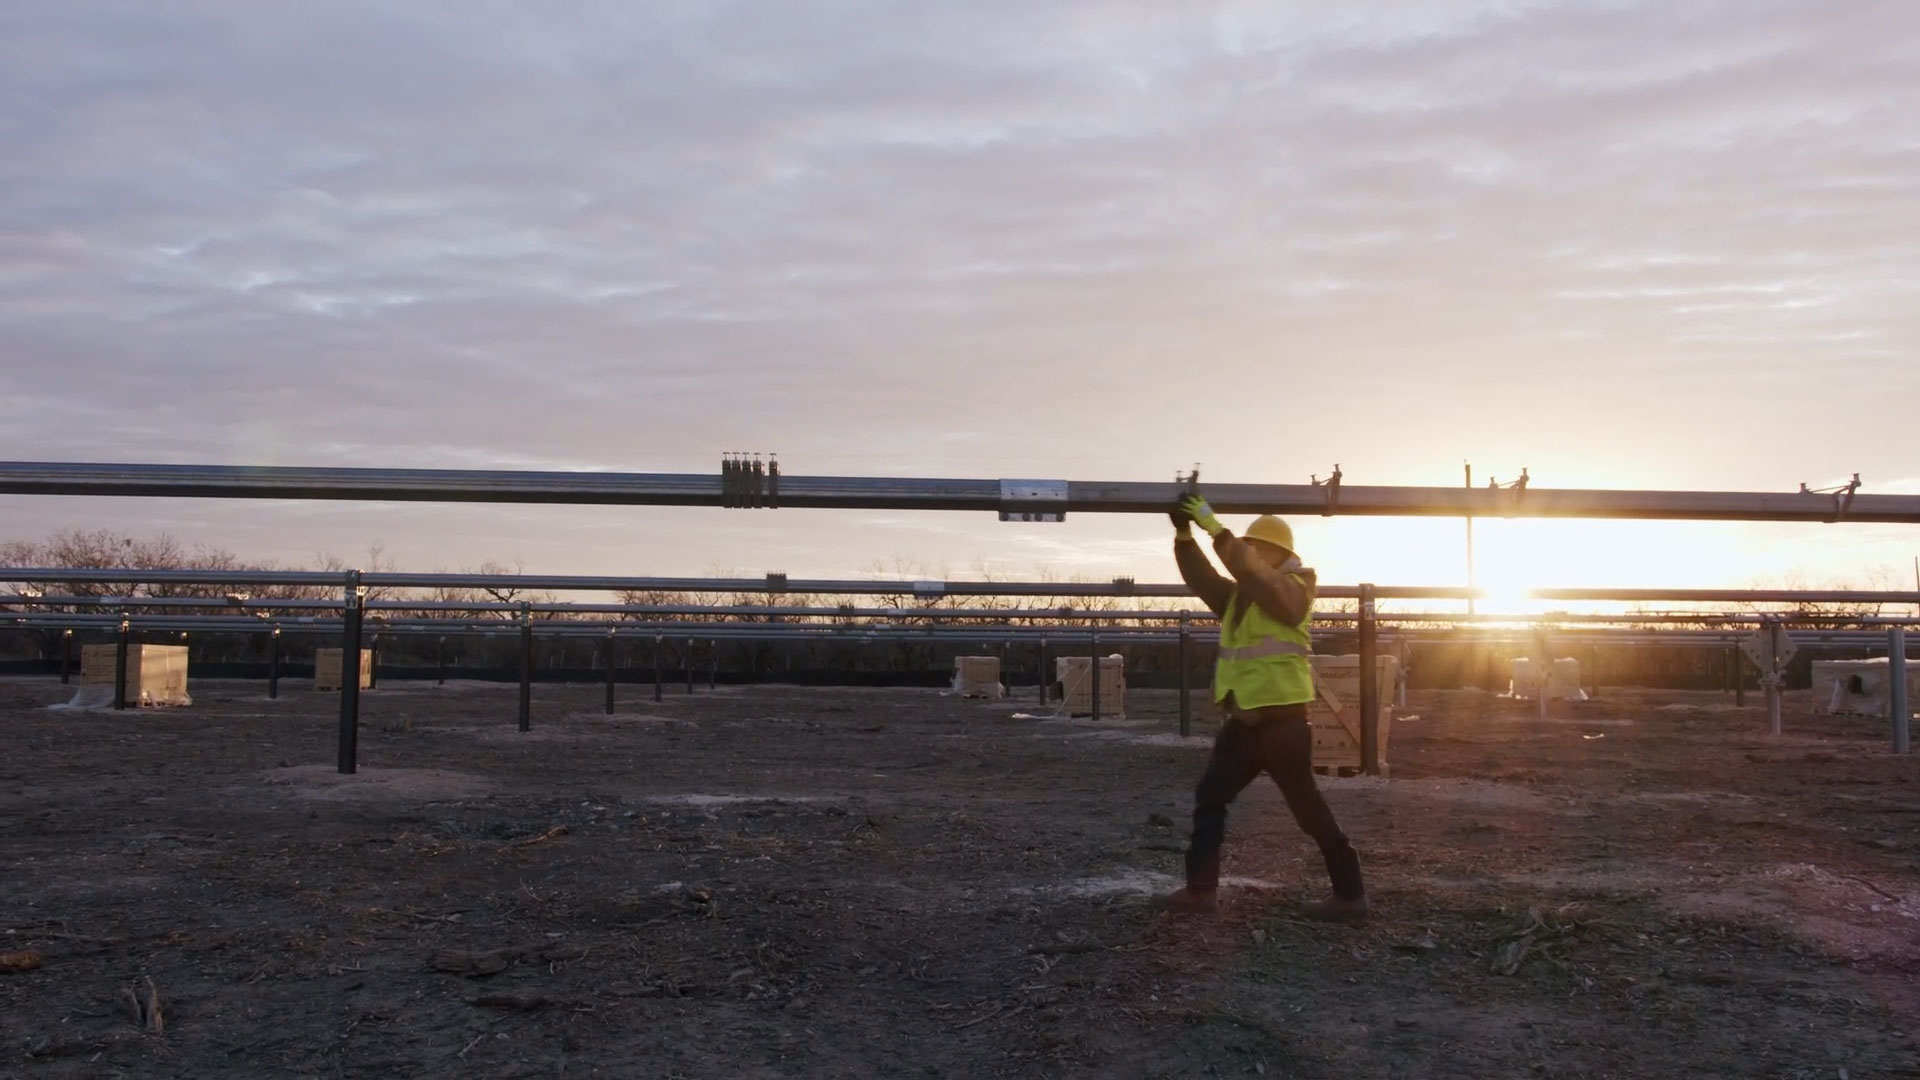 Avantus is bringing the Galloway 2 Solar Project to Concho County, Texas, where it will generate enough low-cost clean electricity for 60,000 people. Workers and community leaders talked to us about what the project has meant to them.